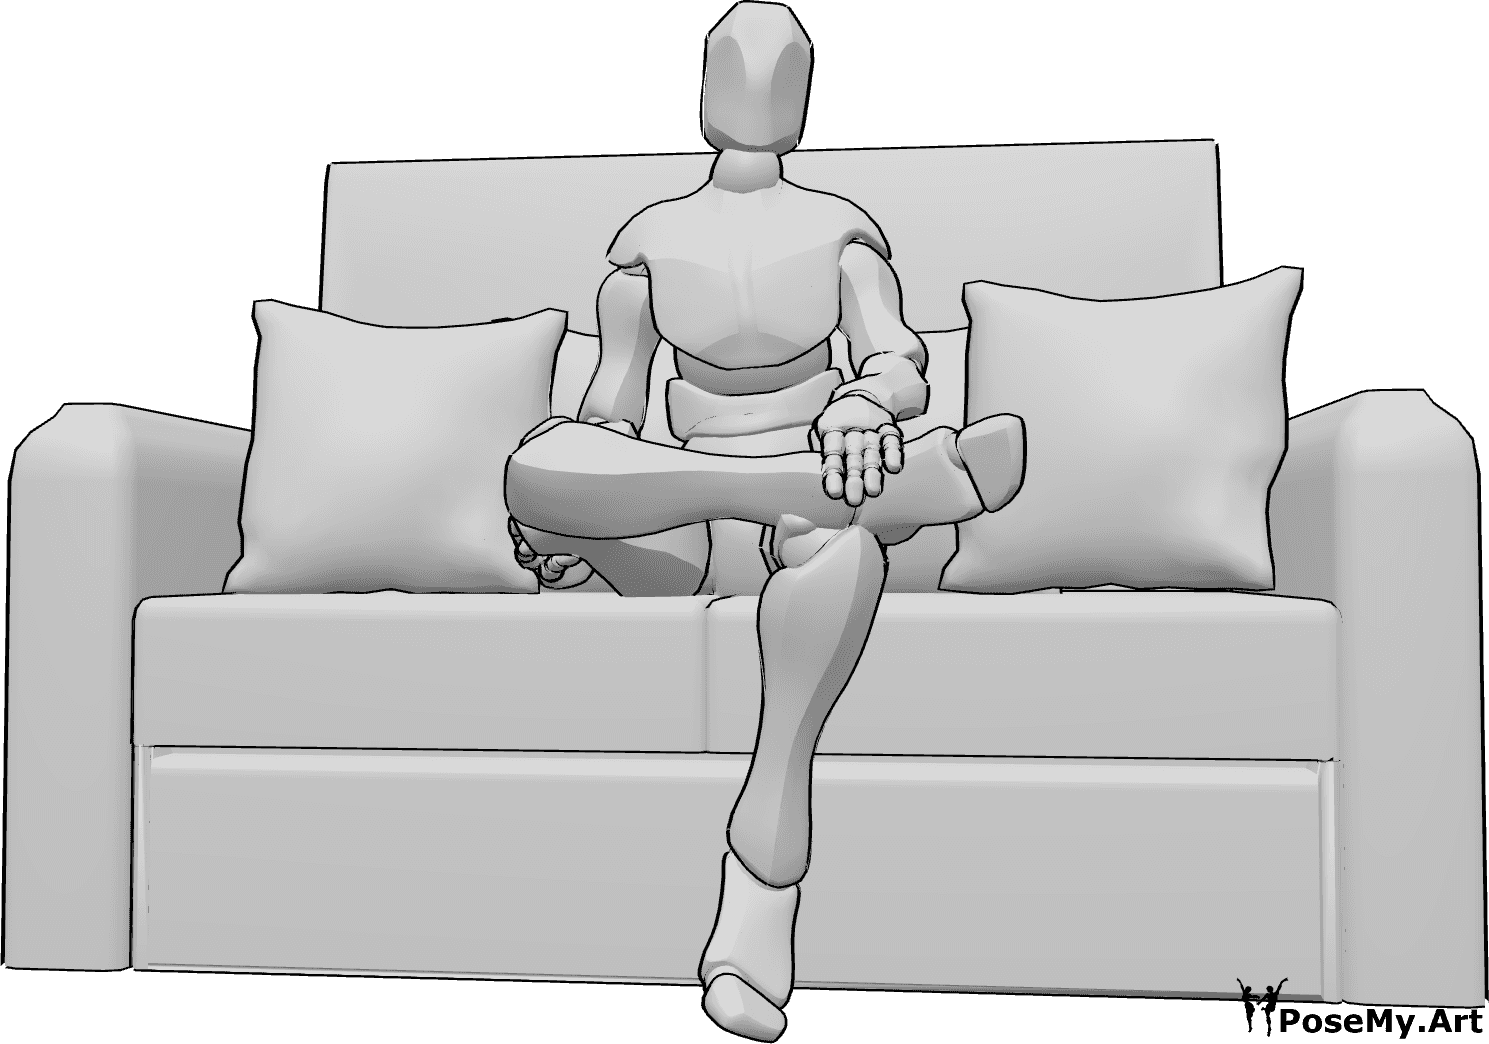 Pose Reference - Male casual sitting pose - Male is sitting casually with his legs crossed on the couch pose